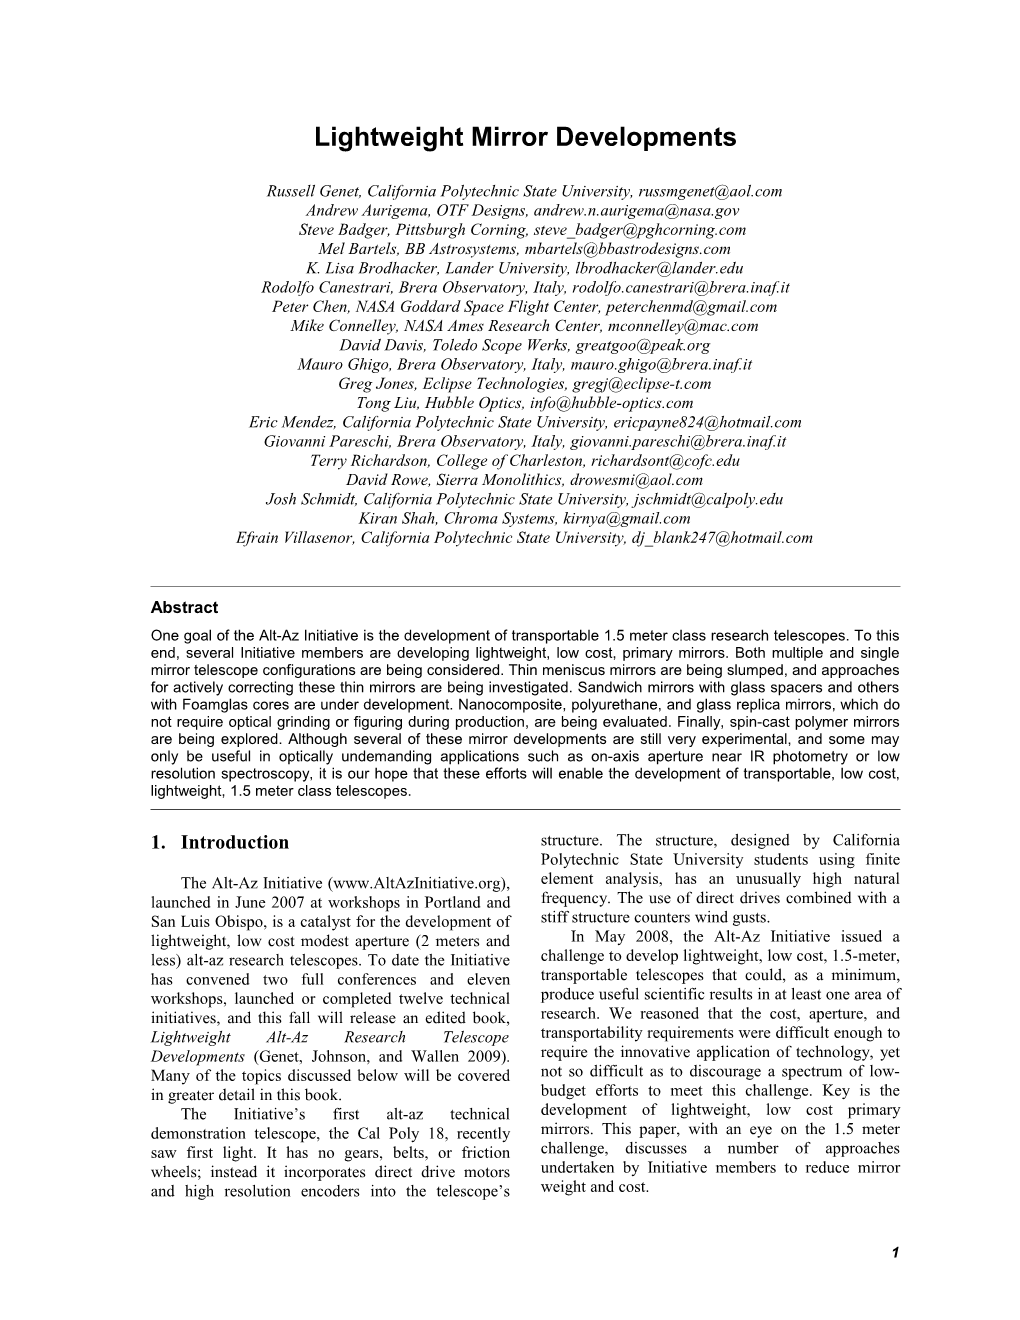 A Paper for the Society for Astronomical Sciences